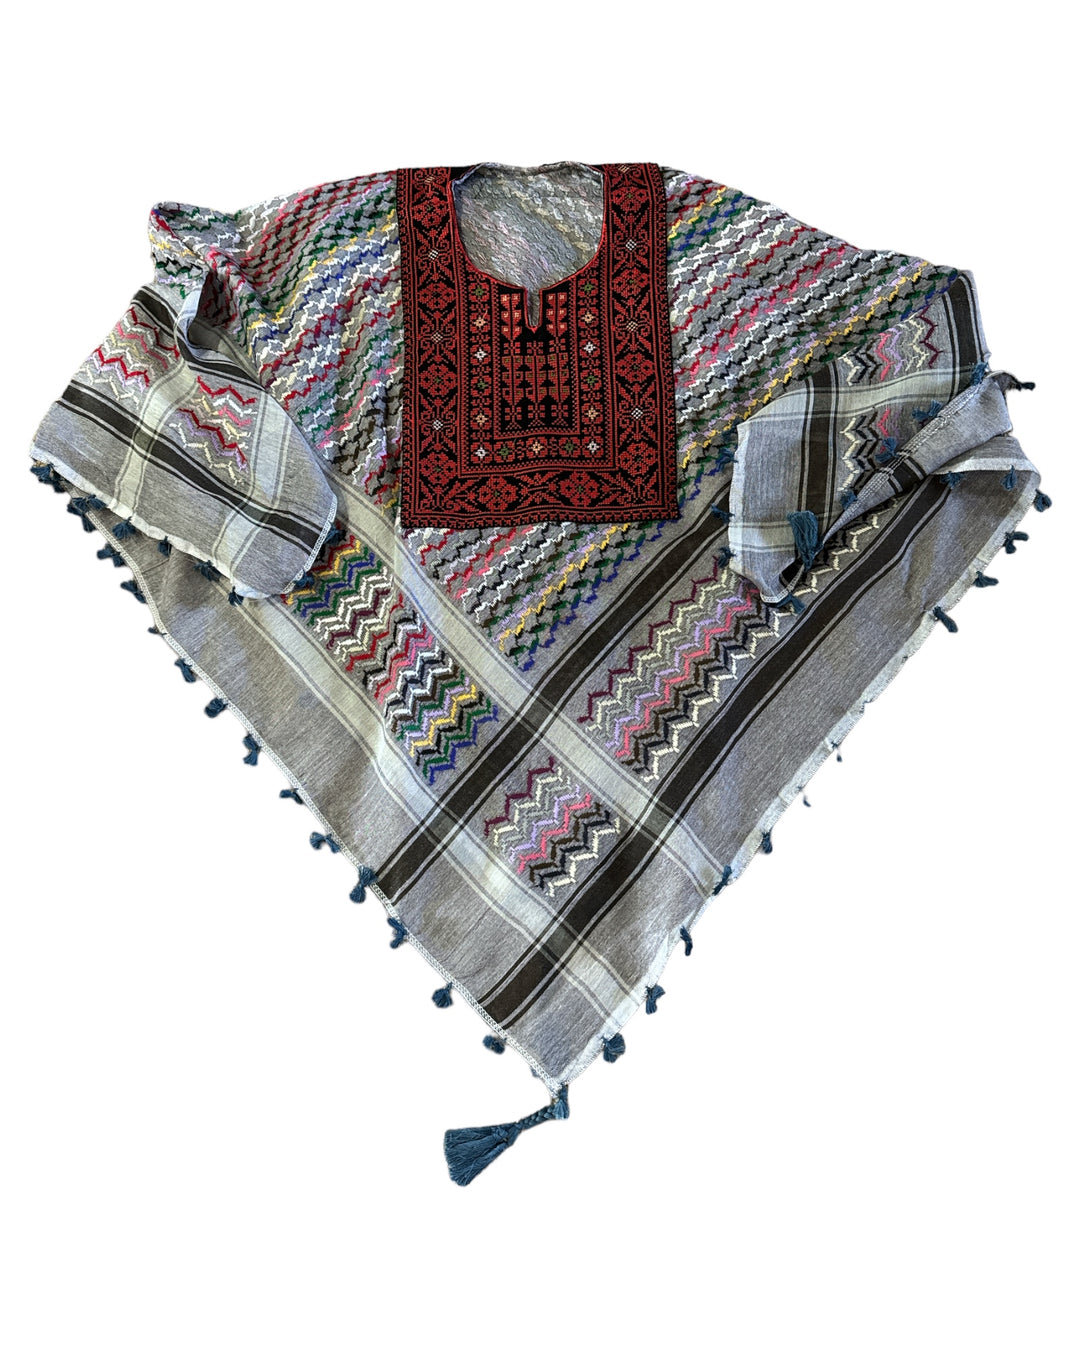 Hand Stitched Grey & Multi-Coloured Poncho with Keffiyeh design and Embroidery